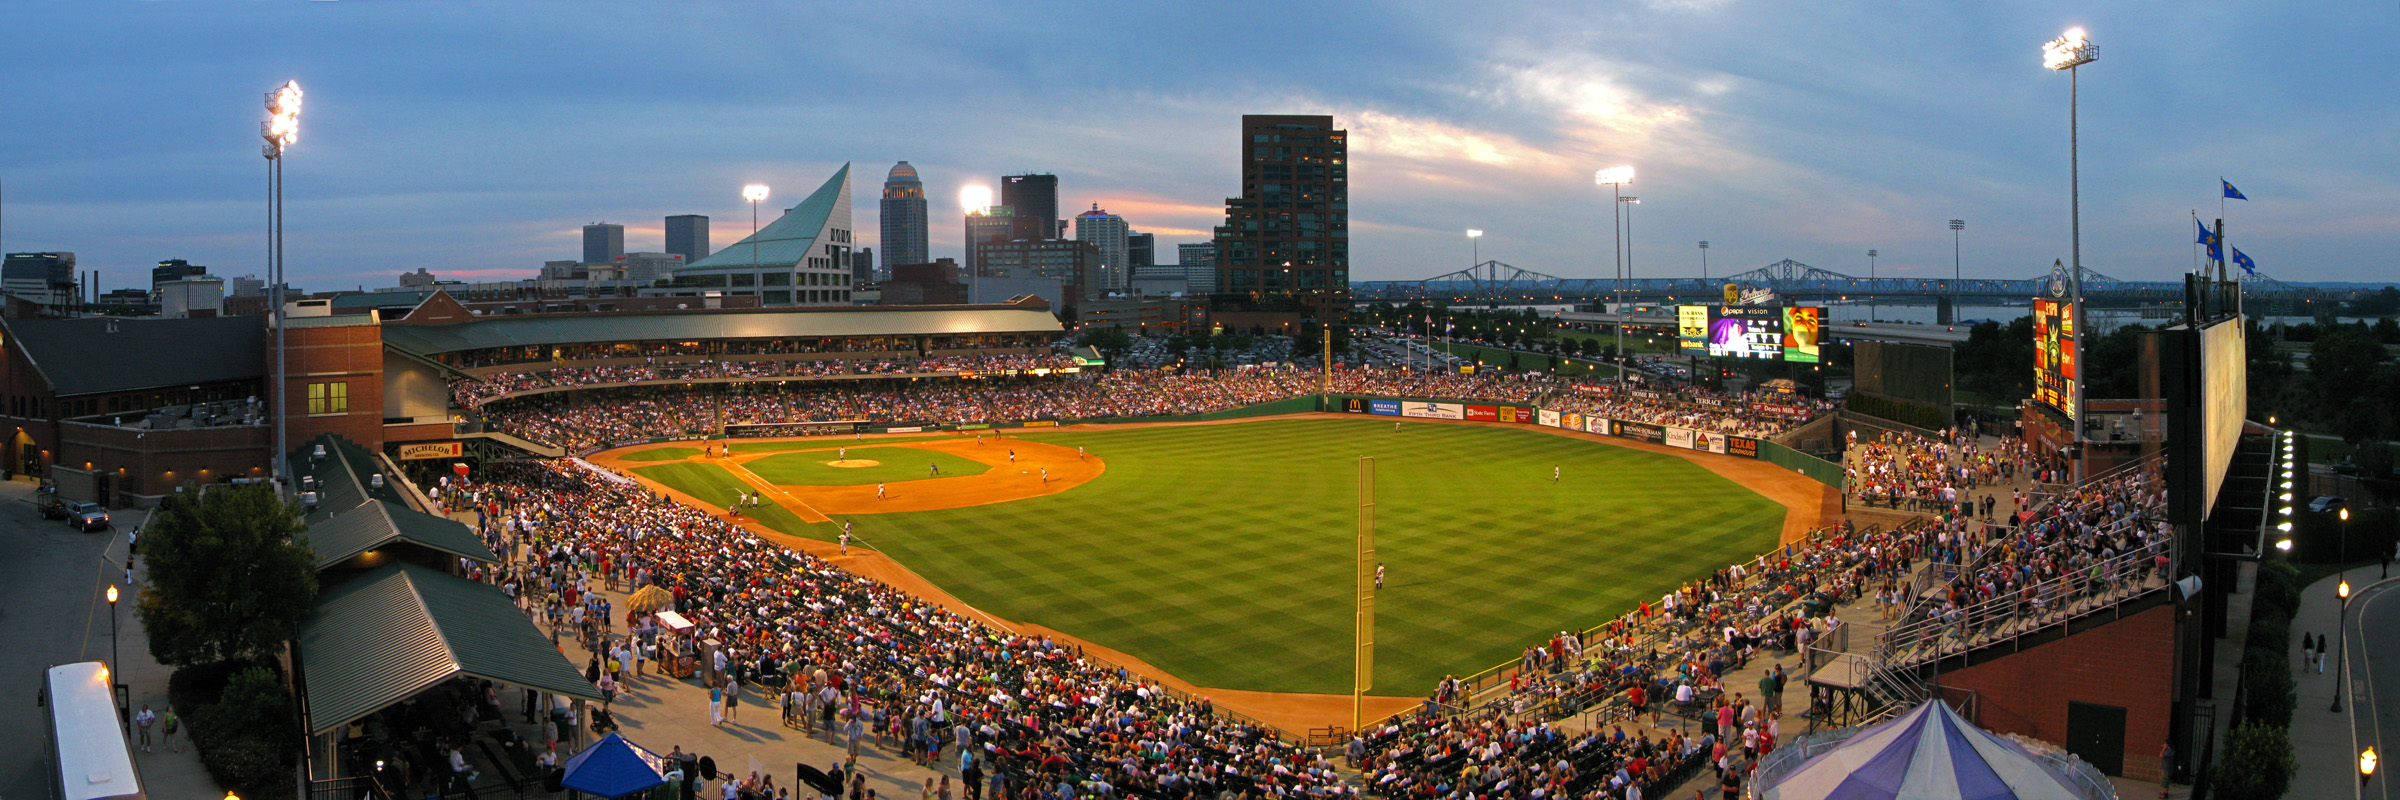 Vote for Louisville Slugger Field in Best of the Ballparks | www.bagssaleusa.com/product-category/speedy-bag/